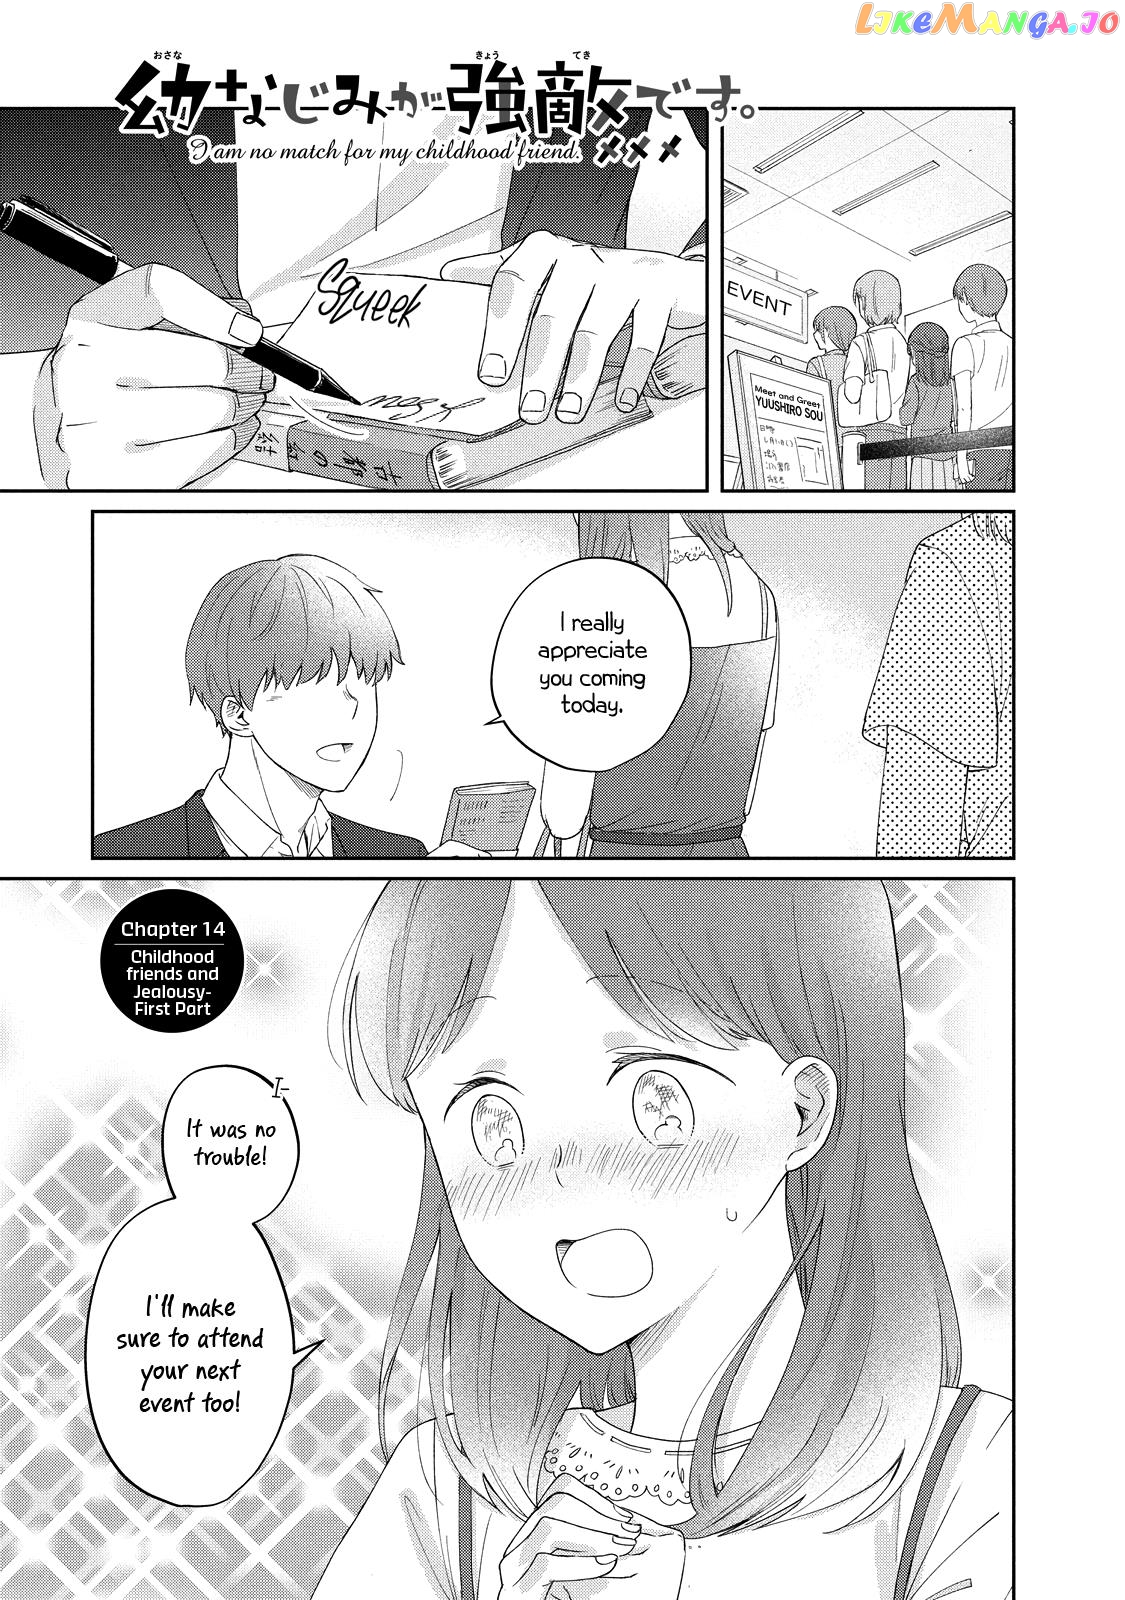 I Am No Match For My Childhood Friend. chapter 14 - page 1